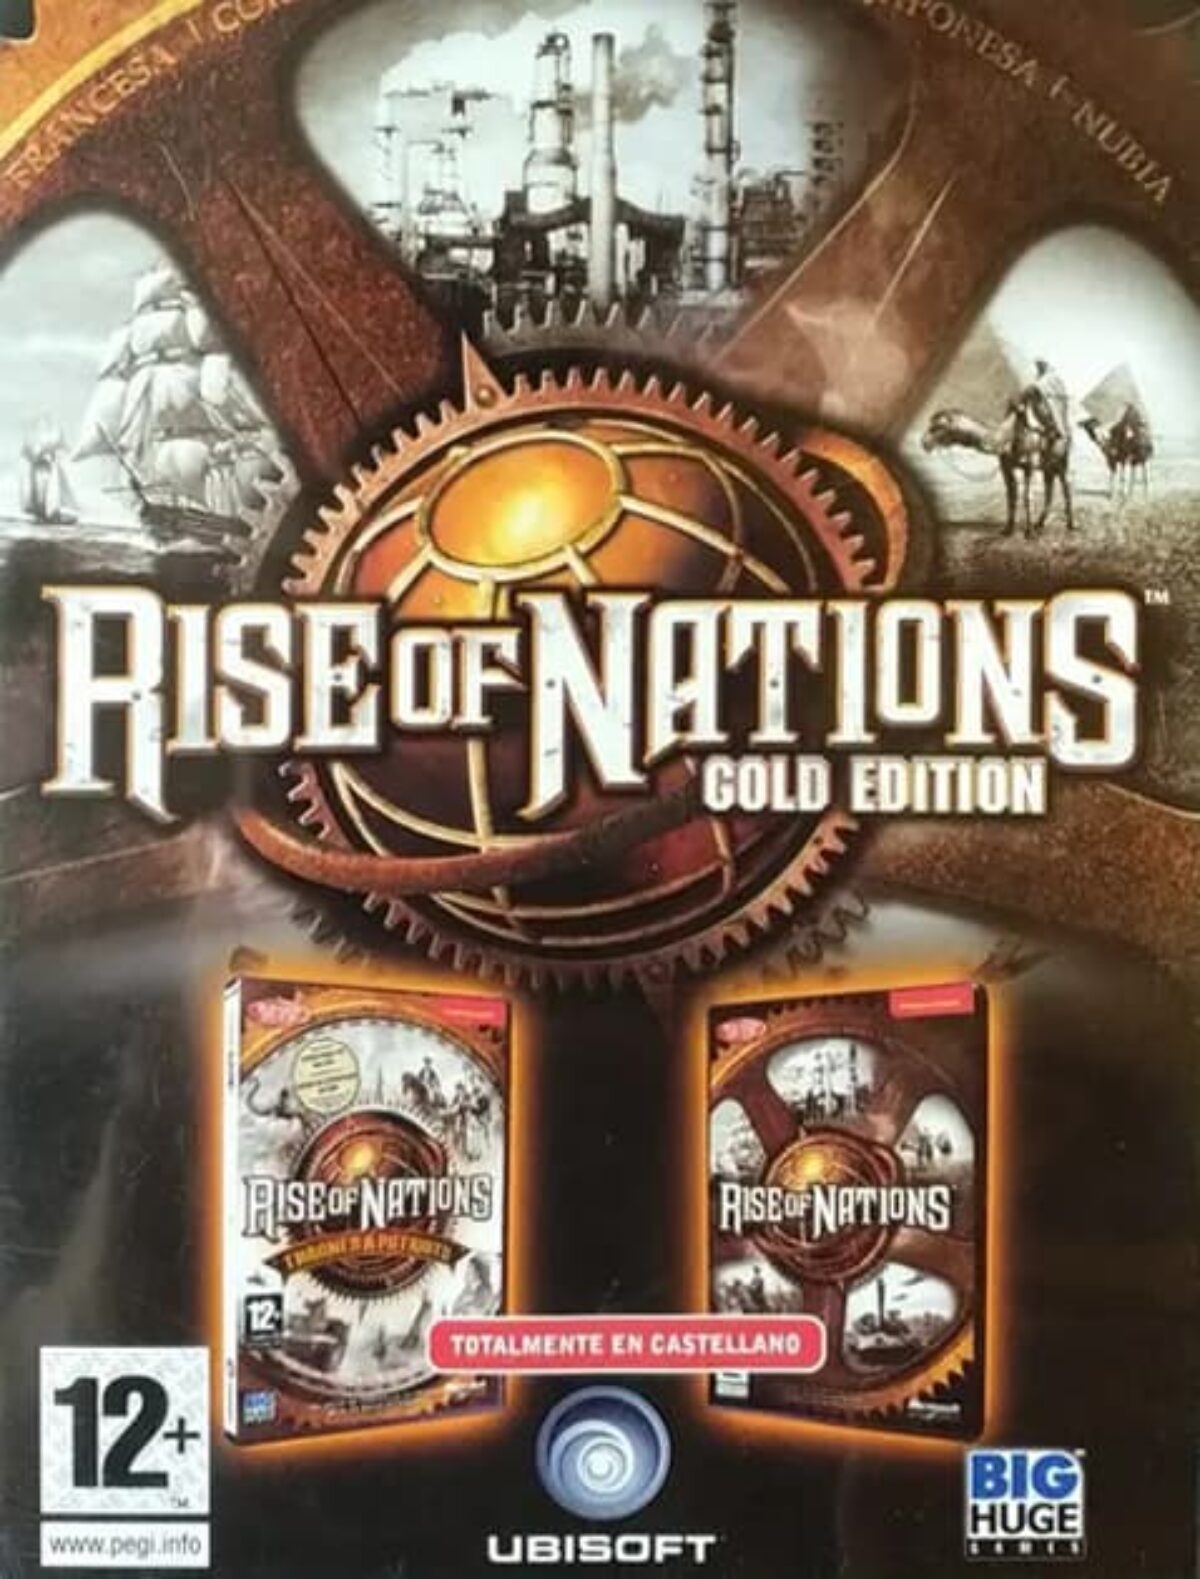 Rise of Nations Gold Edition PC Full Español – BlizzBoyGames